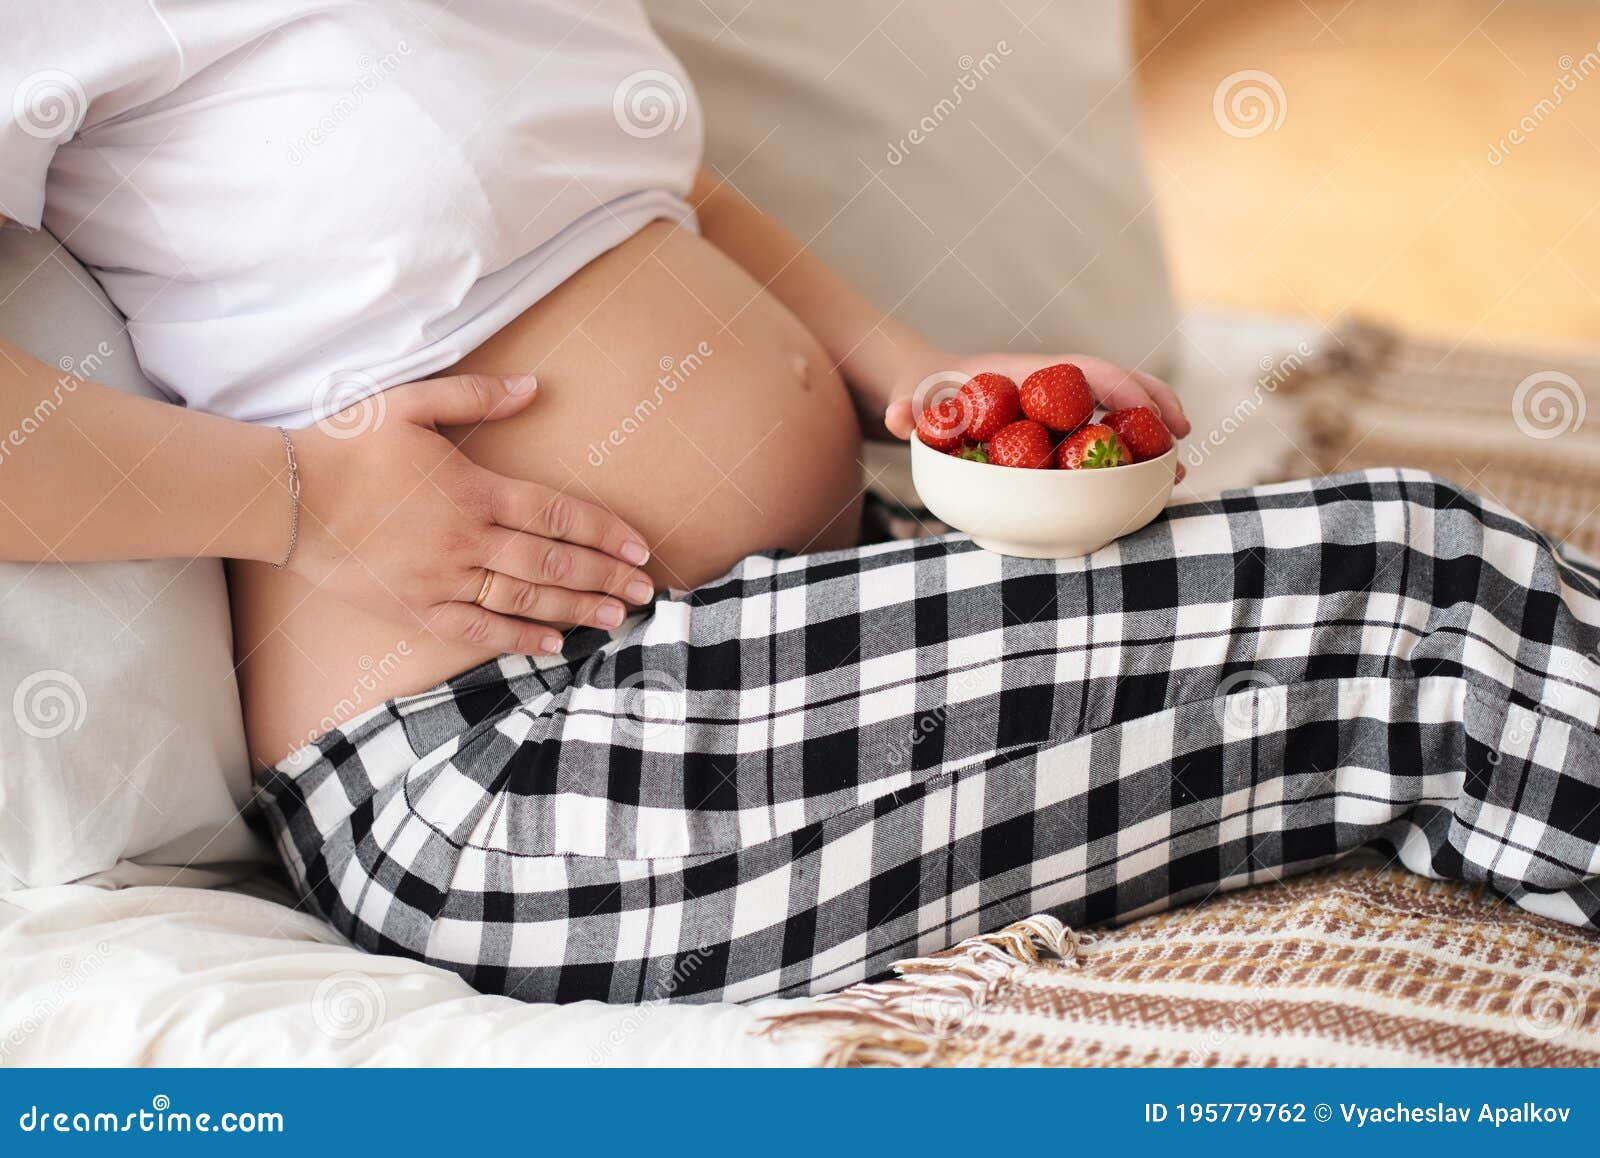 tummy of a pregnant woman and strawberries